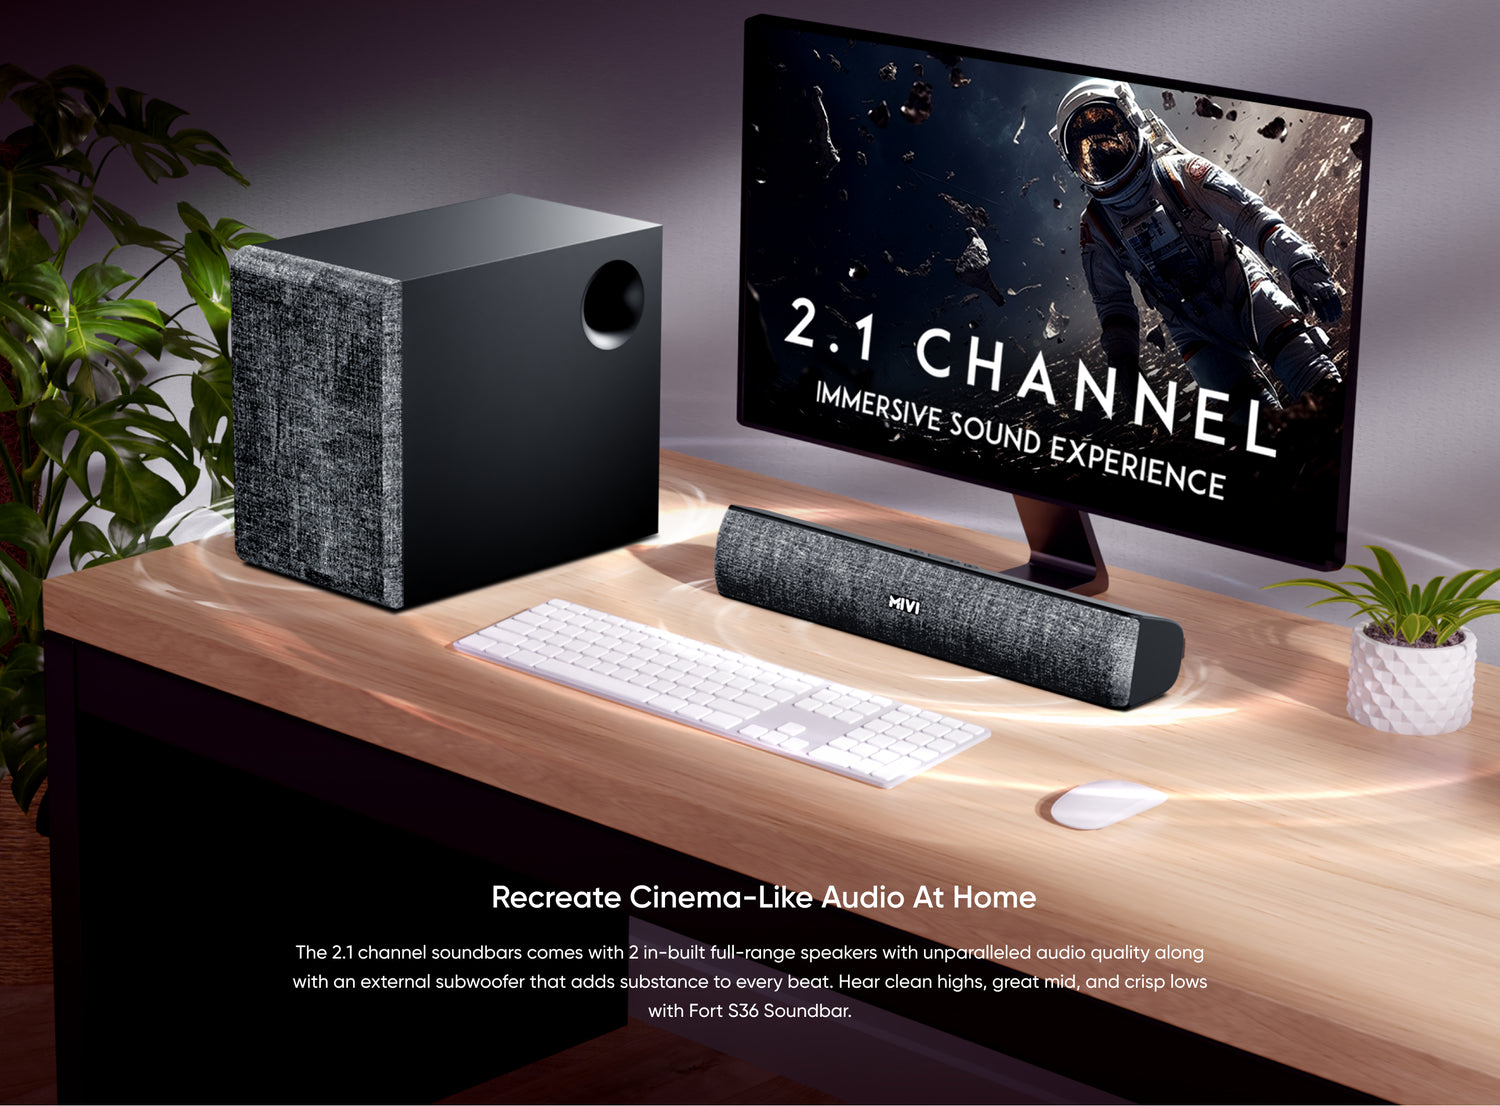 Recreate Cinema-like Audio At Home

The 2.1 channel soundbars comes with 2 in-built full-range speakers with unparalleled audio quality along with an external subwoofer that adds substance to every beat. Hear clean highs, great mid, and crisp lows with Fort S36 Soundbar.